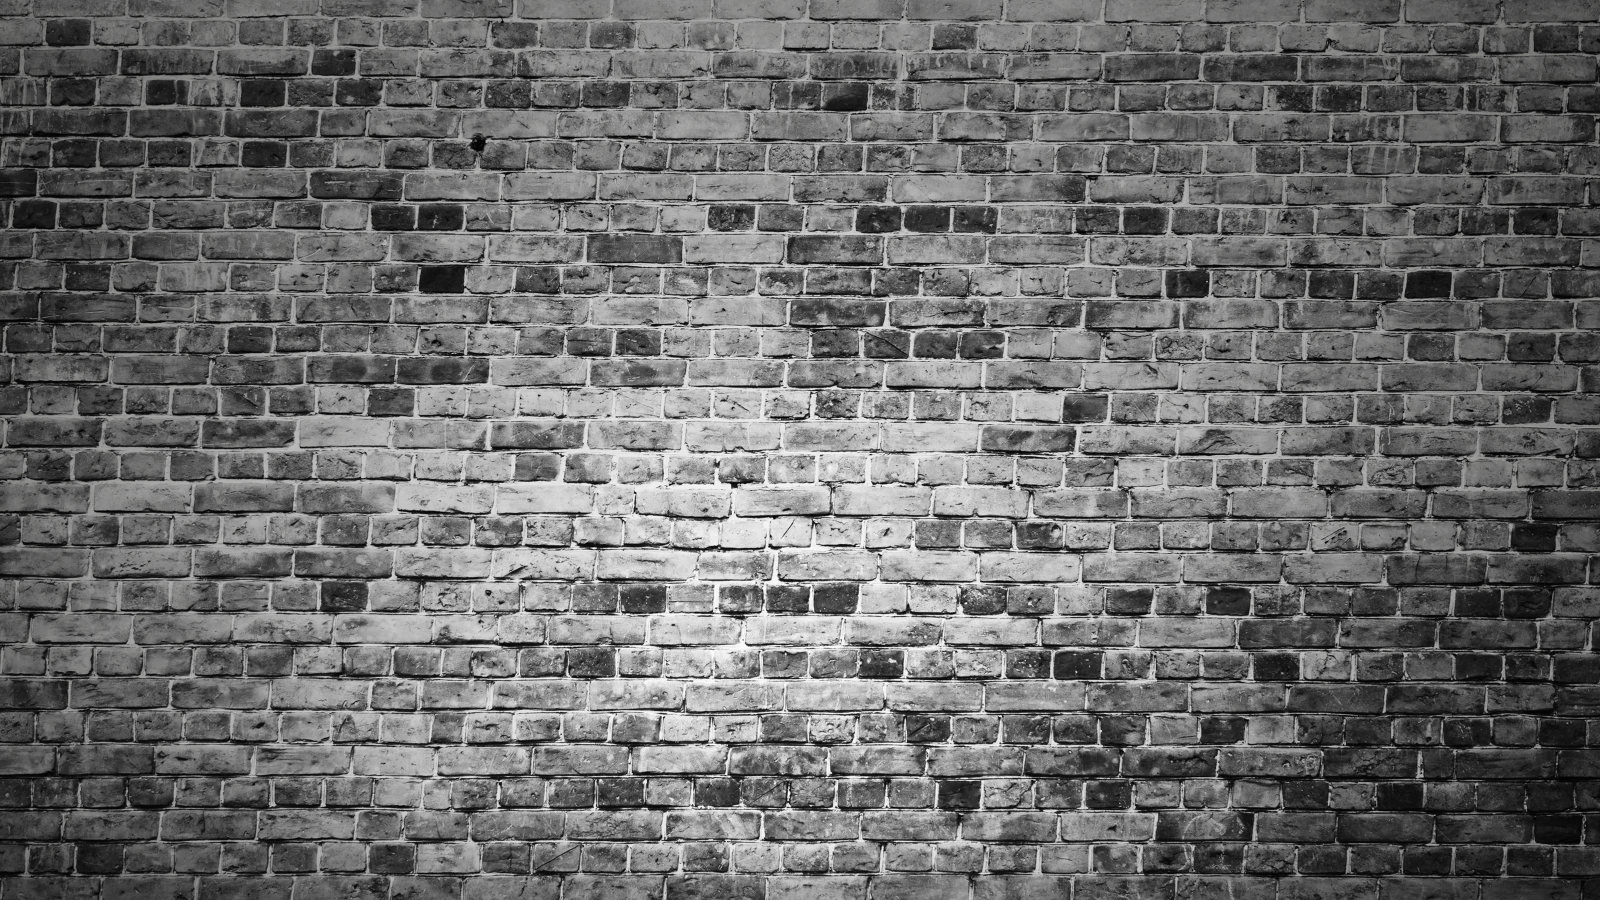 Download wallpaper 1600x900 brick wall, black and white, 16:9 widescreen  1600x900 hd background, 8721